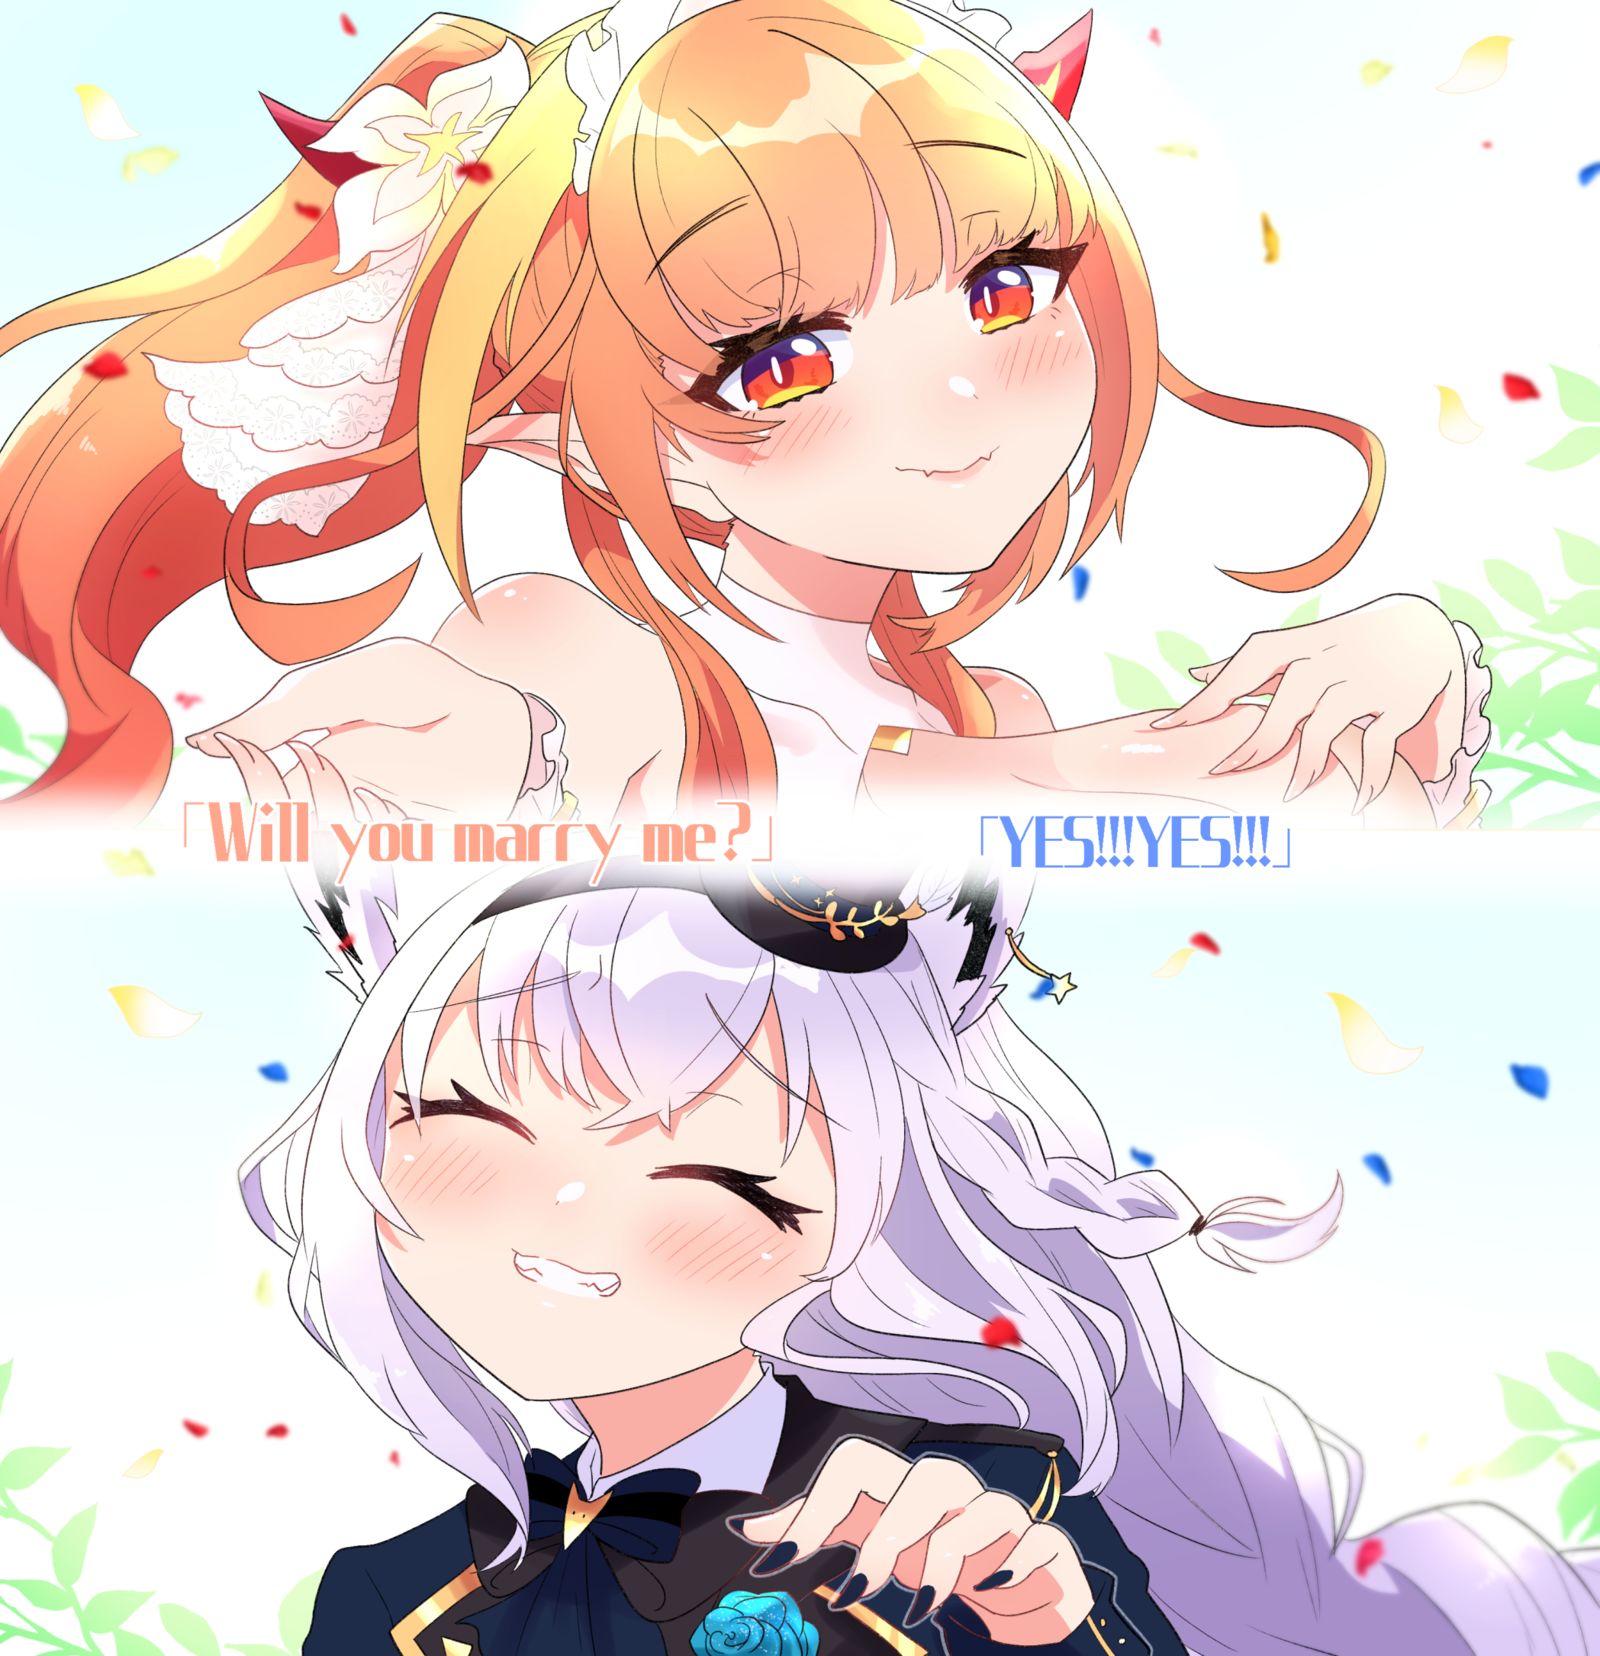 「Will you marry me?」「YES!!YES!!」插画图片壁纸